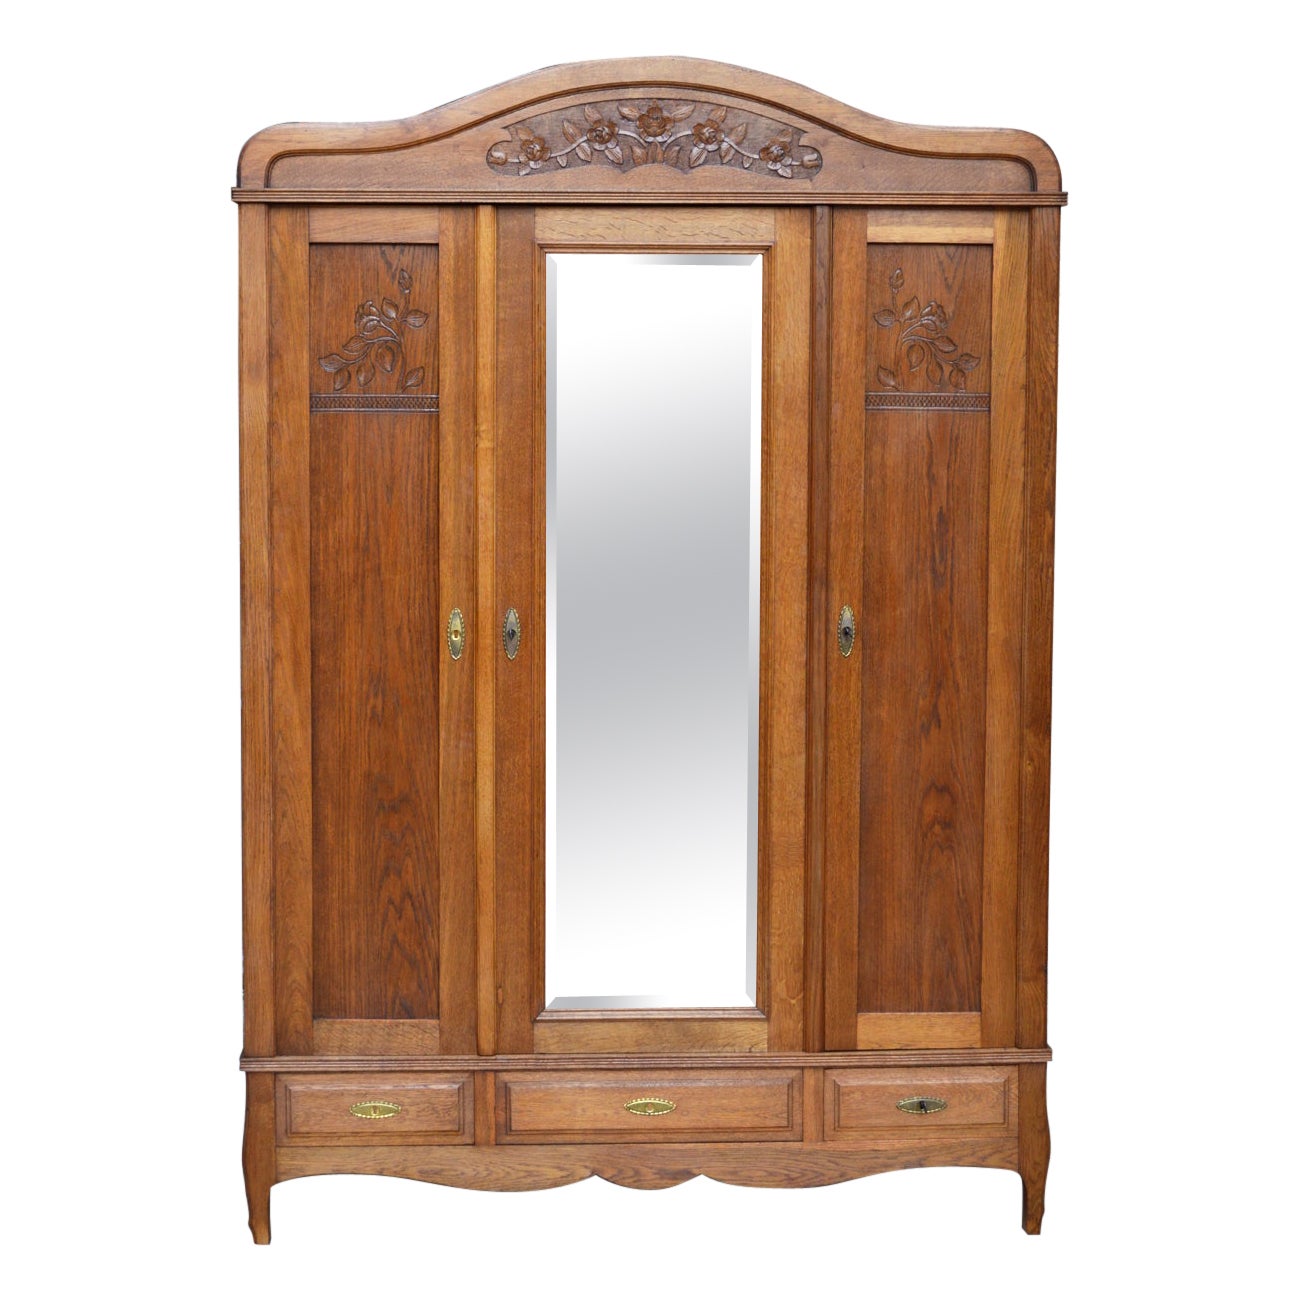 Art Nouveau Wardrobe with Mirror, in Carved Oak, France, circa 1910